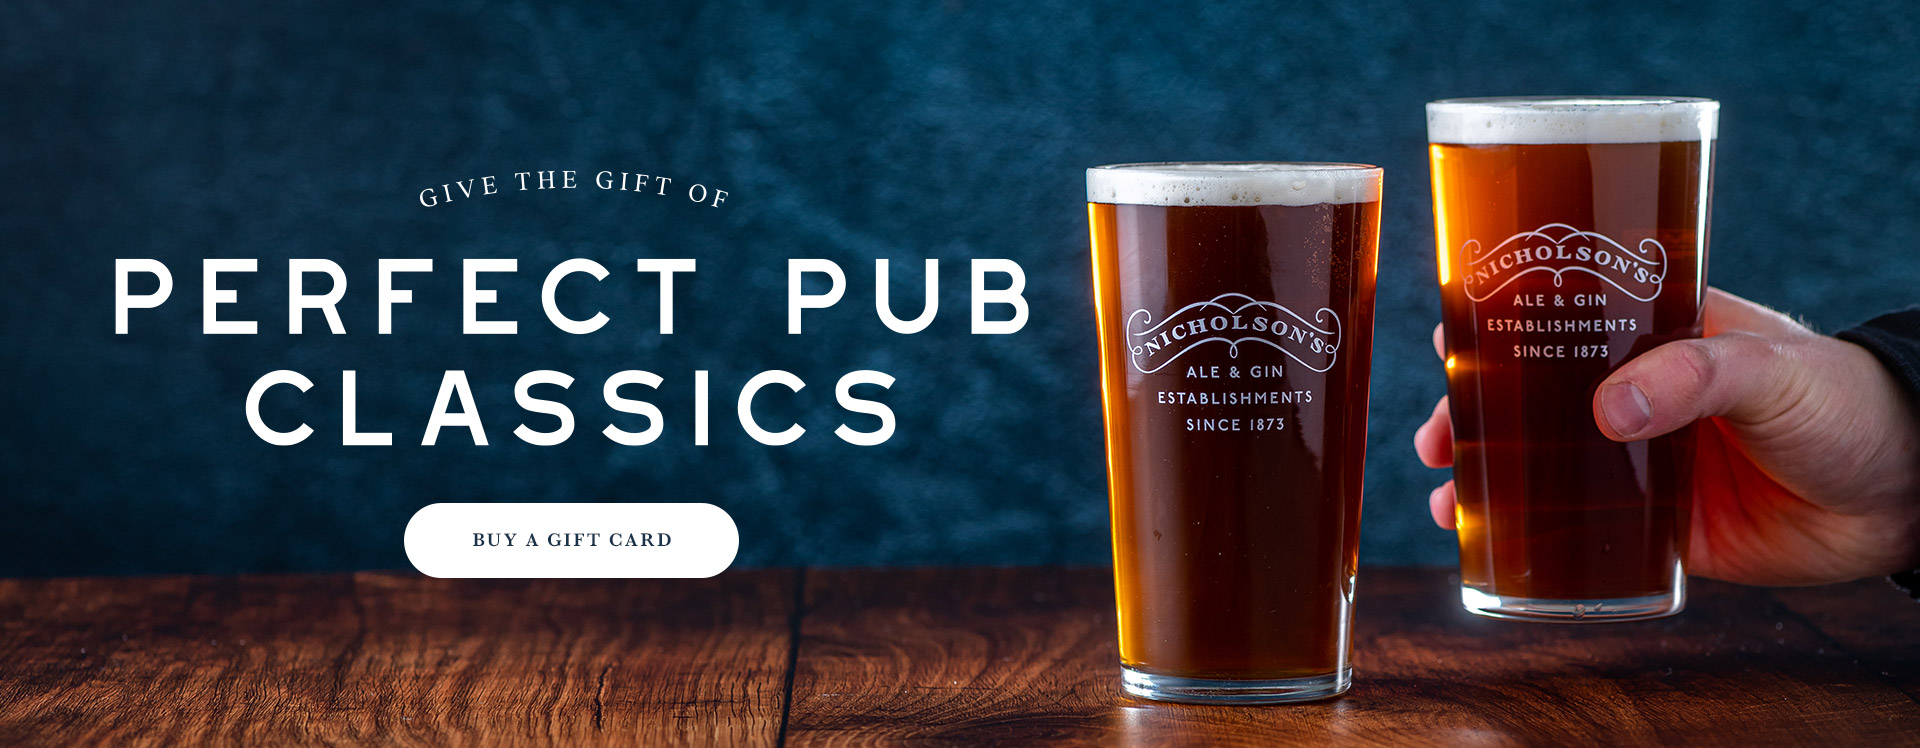 Nicholson’s Pub Gift Voucher at The Ship in London